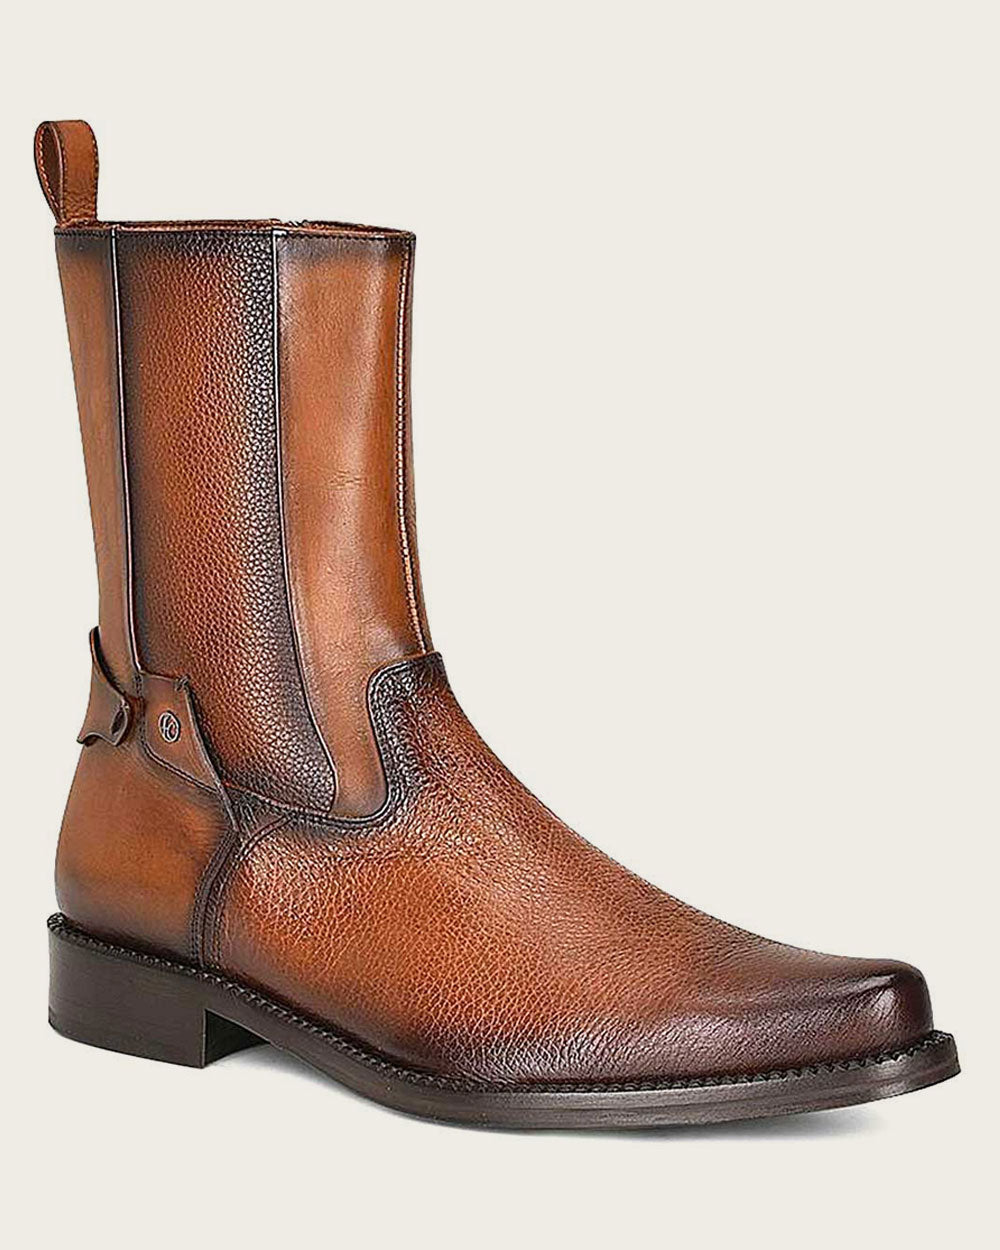 Cuadra Monogram & Logo: Deer leather boots with striking attention to detail. 